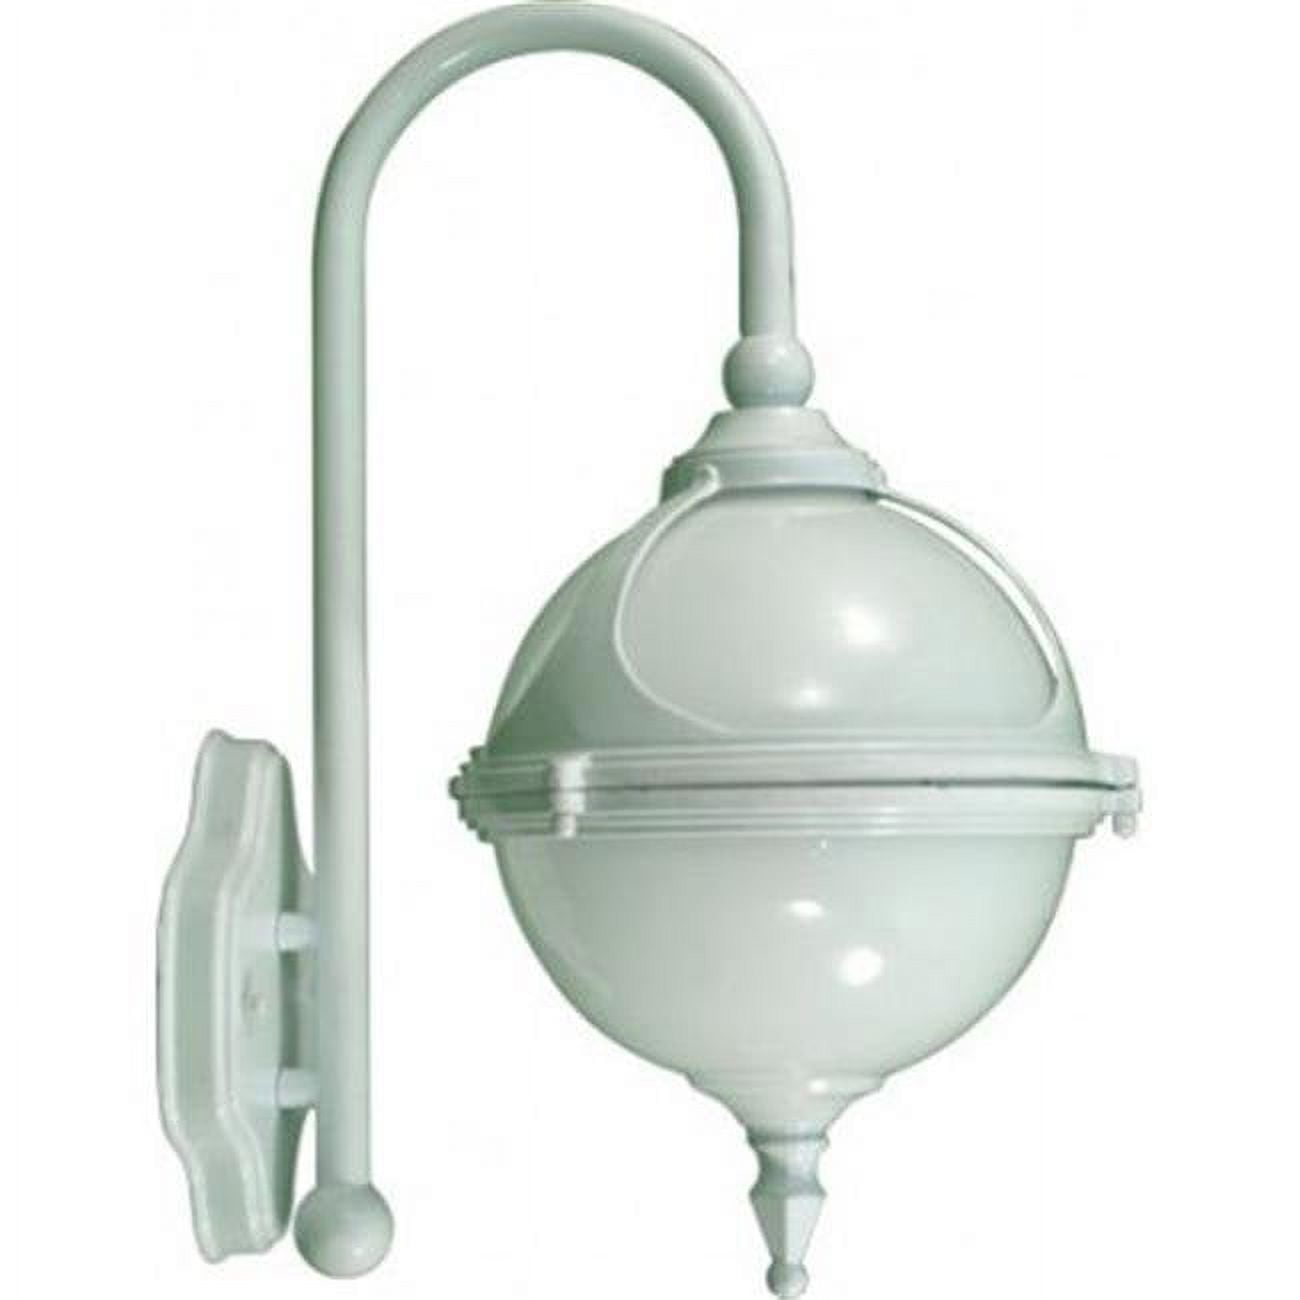 Picture of Dabmar Lighting GM981-W 13W & 120V S13-GU24 Natalie Small Wall Light Fixture - White